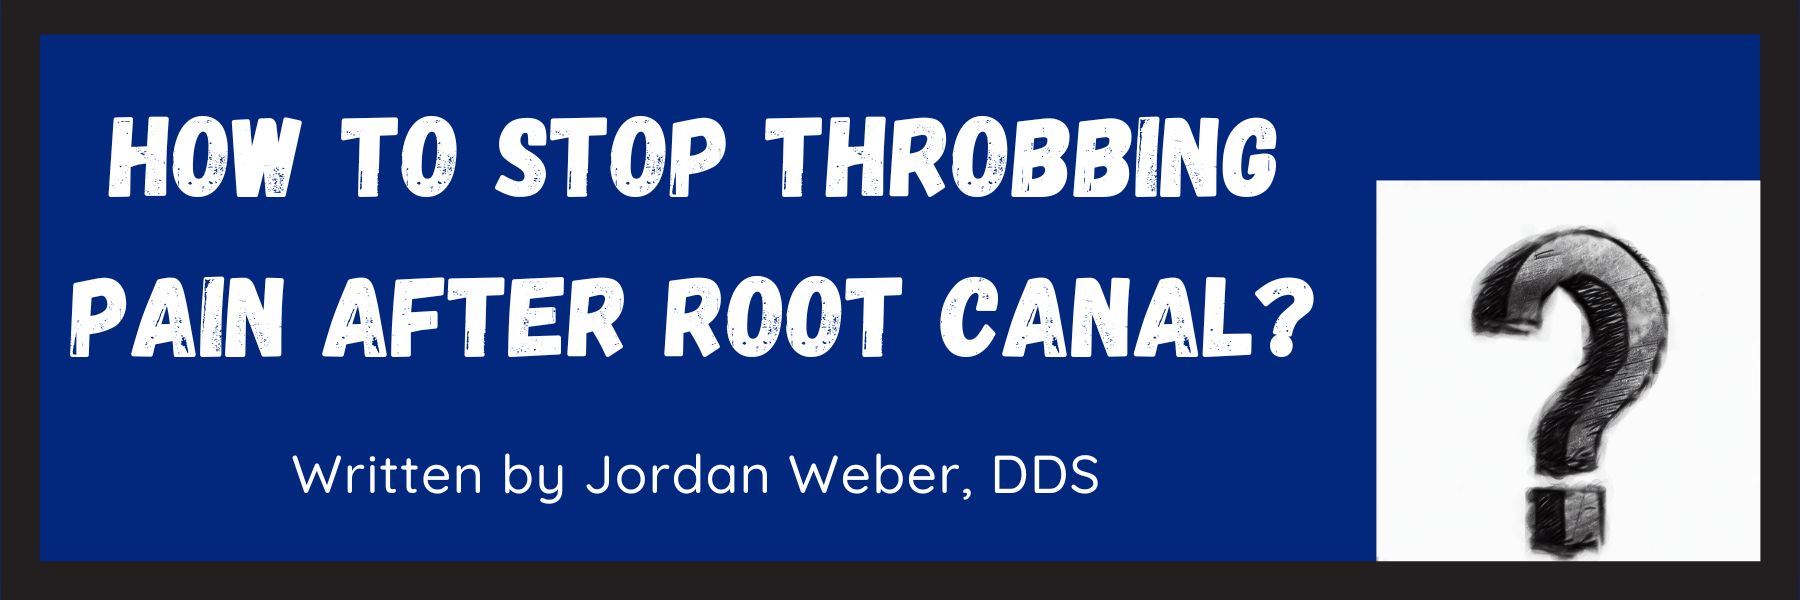 how to stop throbbing pain after root canal